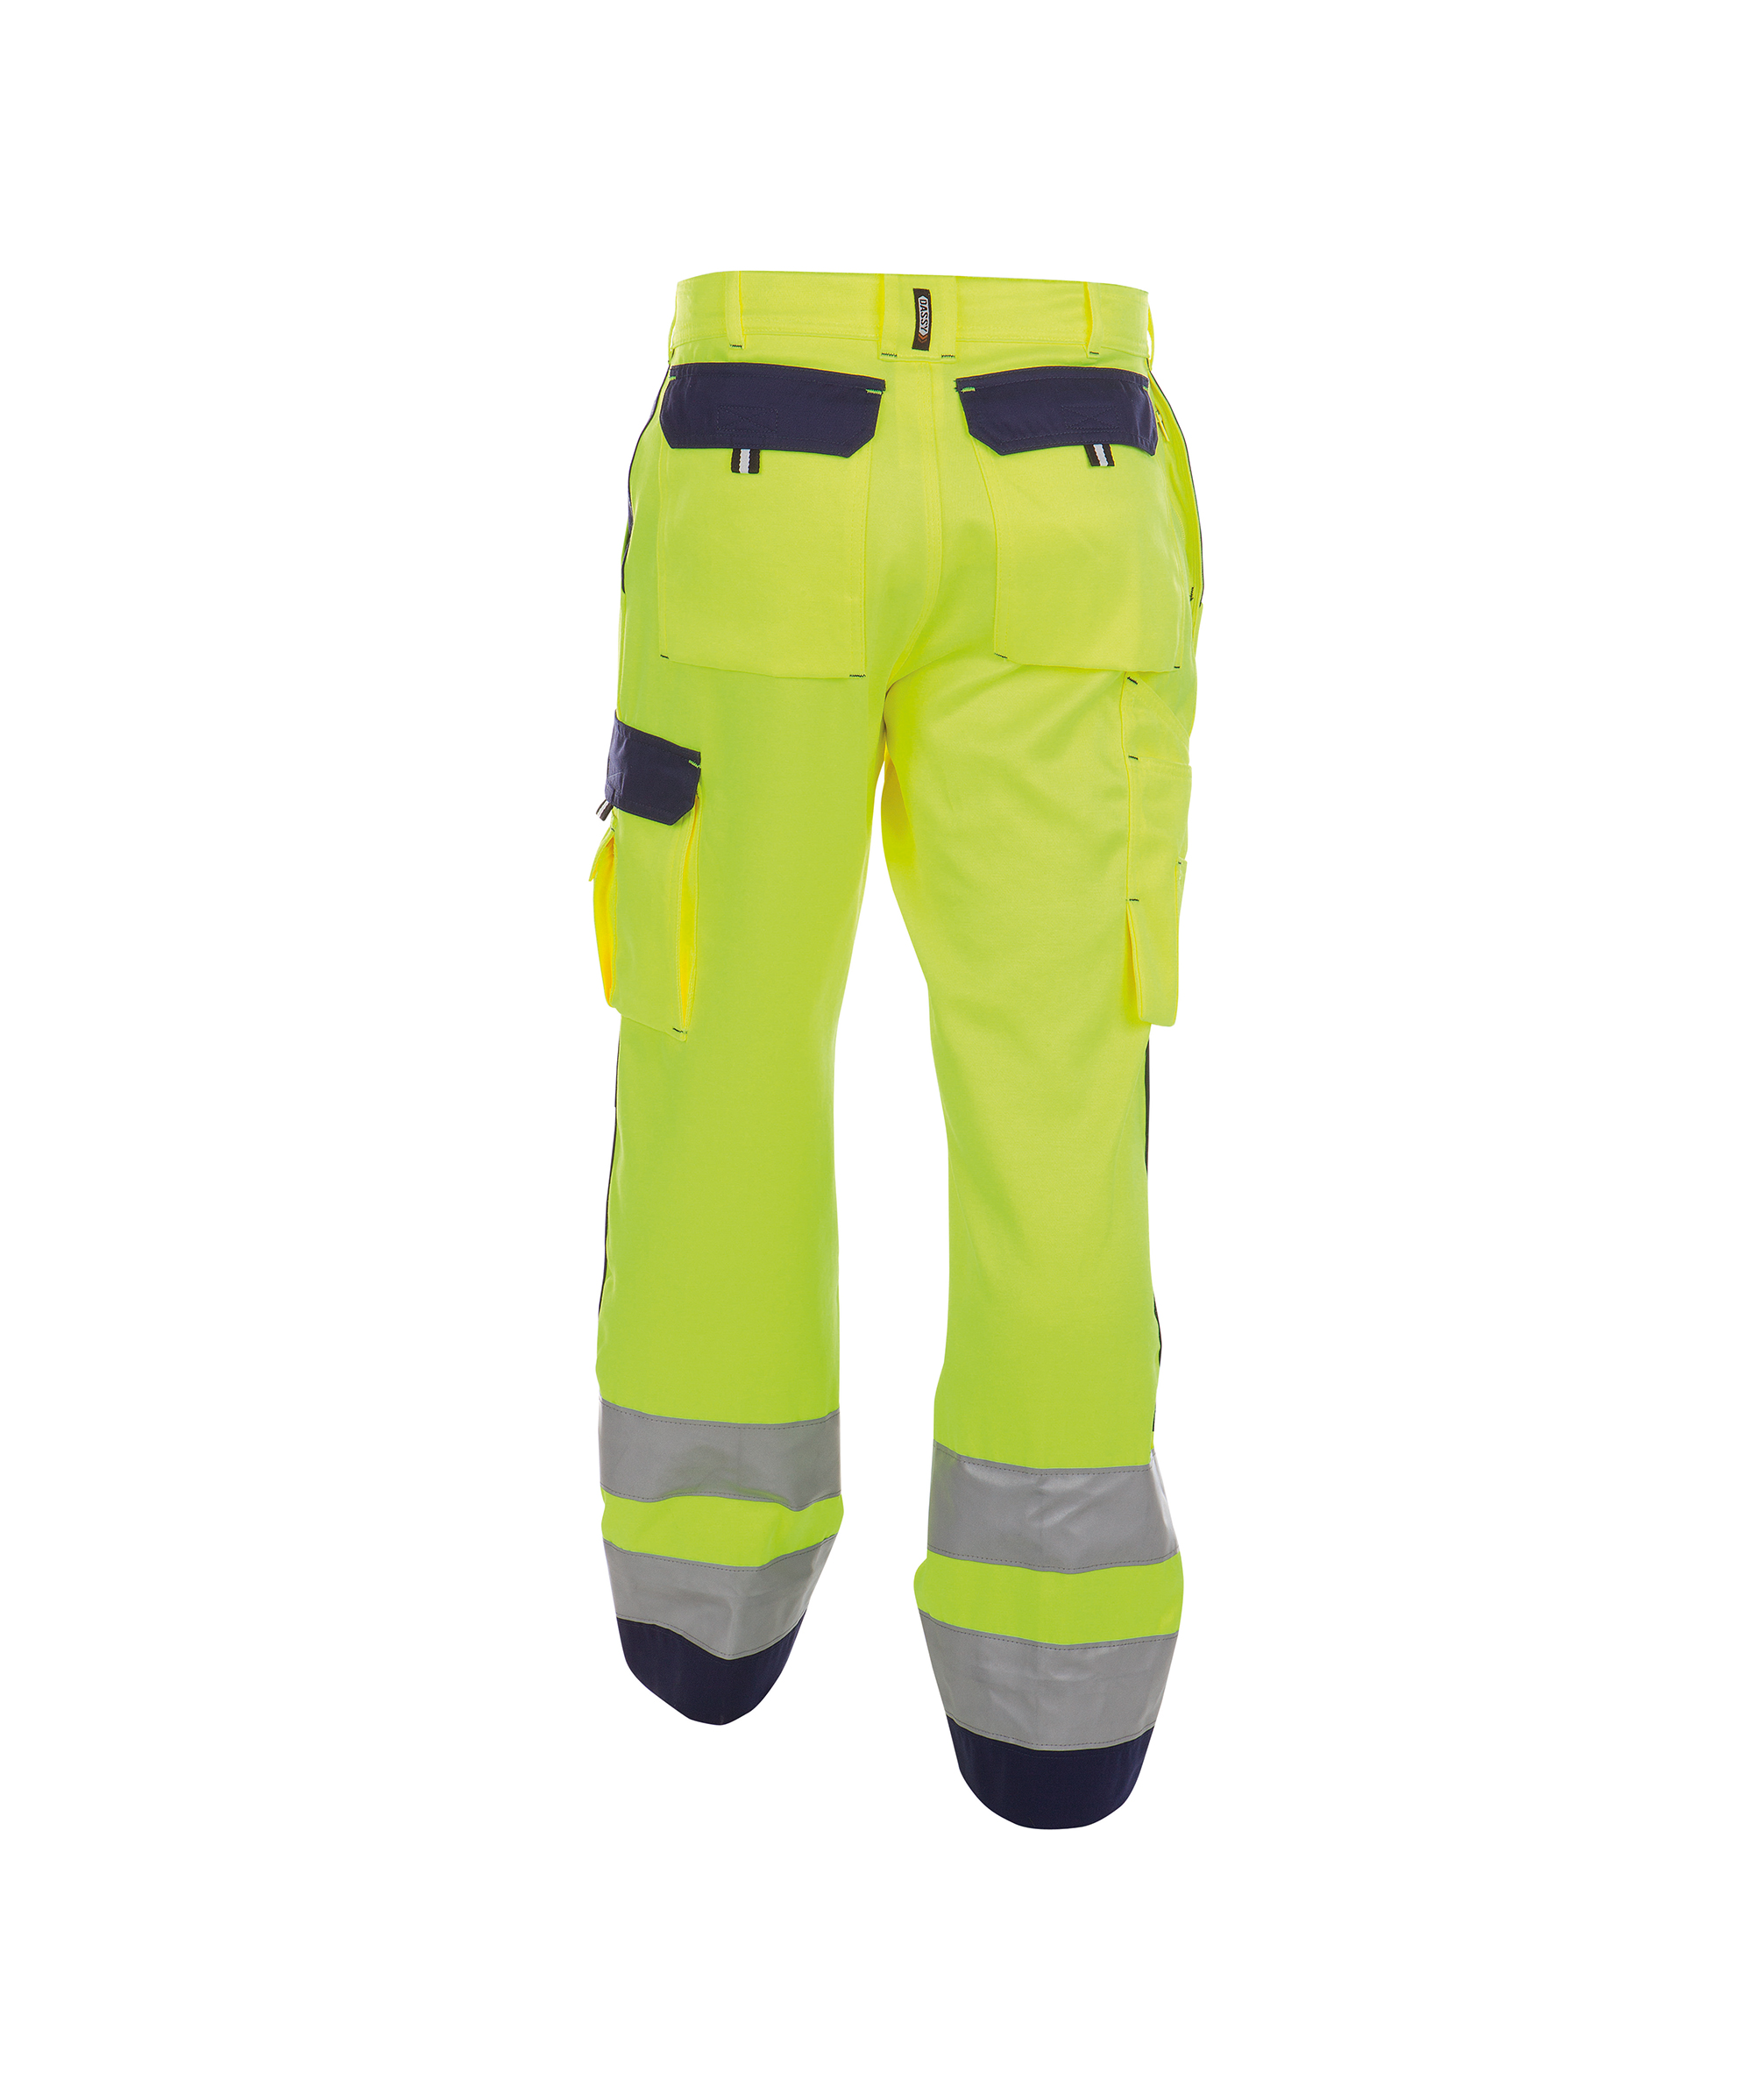 buffalo_high-visibility-work-trousers-with-knee-pockets_fluo-yellow-navy_back.jpg